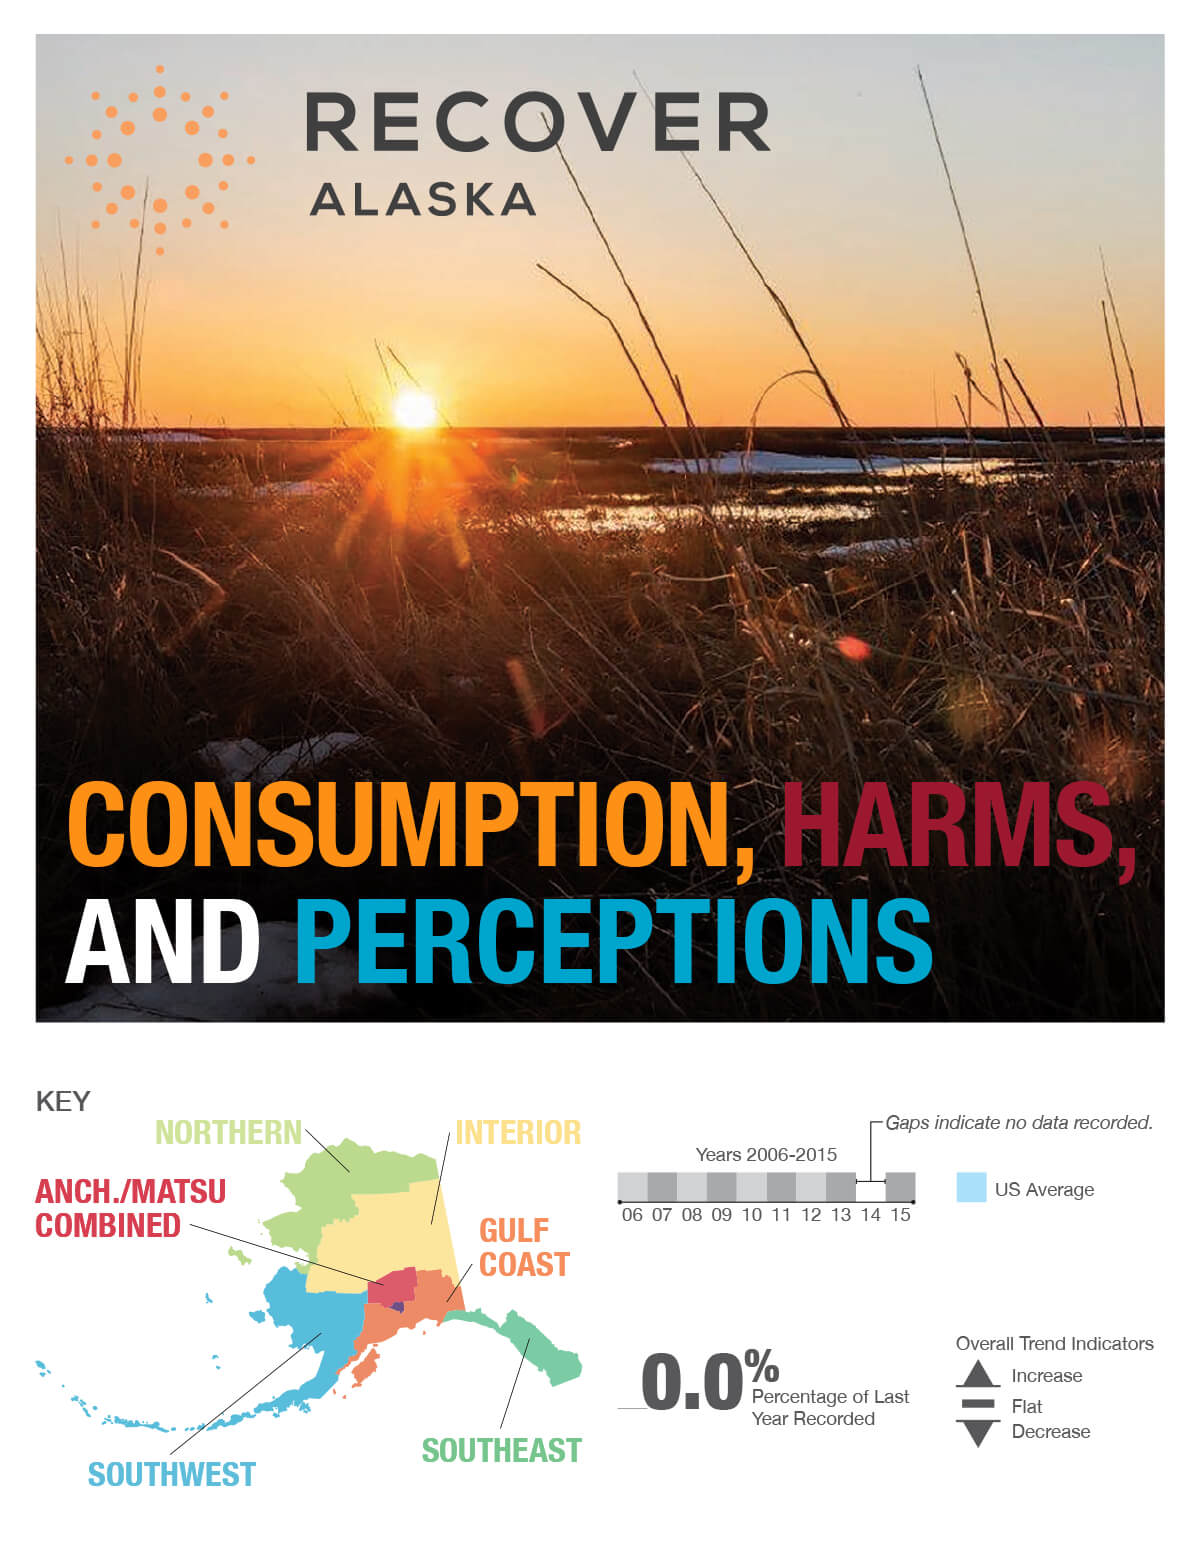 Consumption, Harms, and Perceptions - Recover Alaska